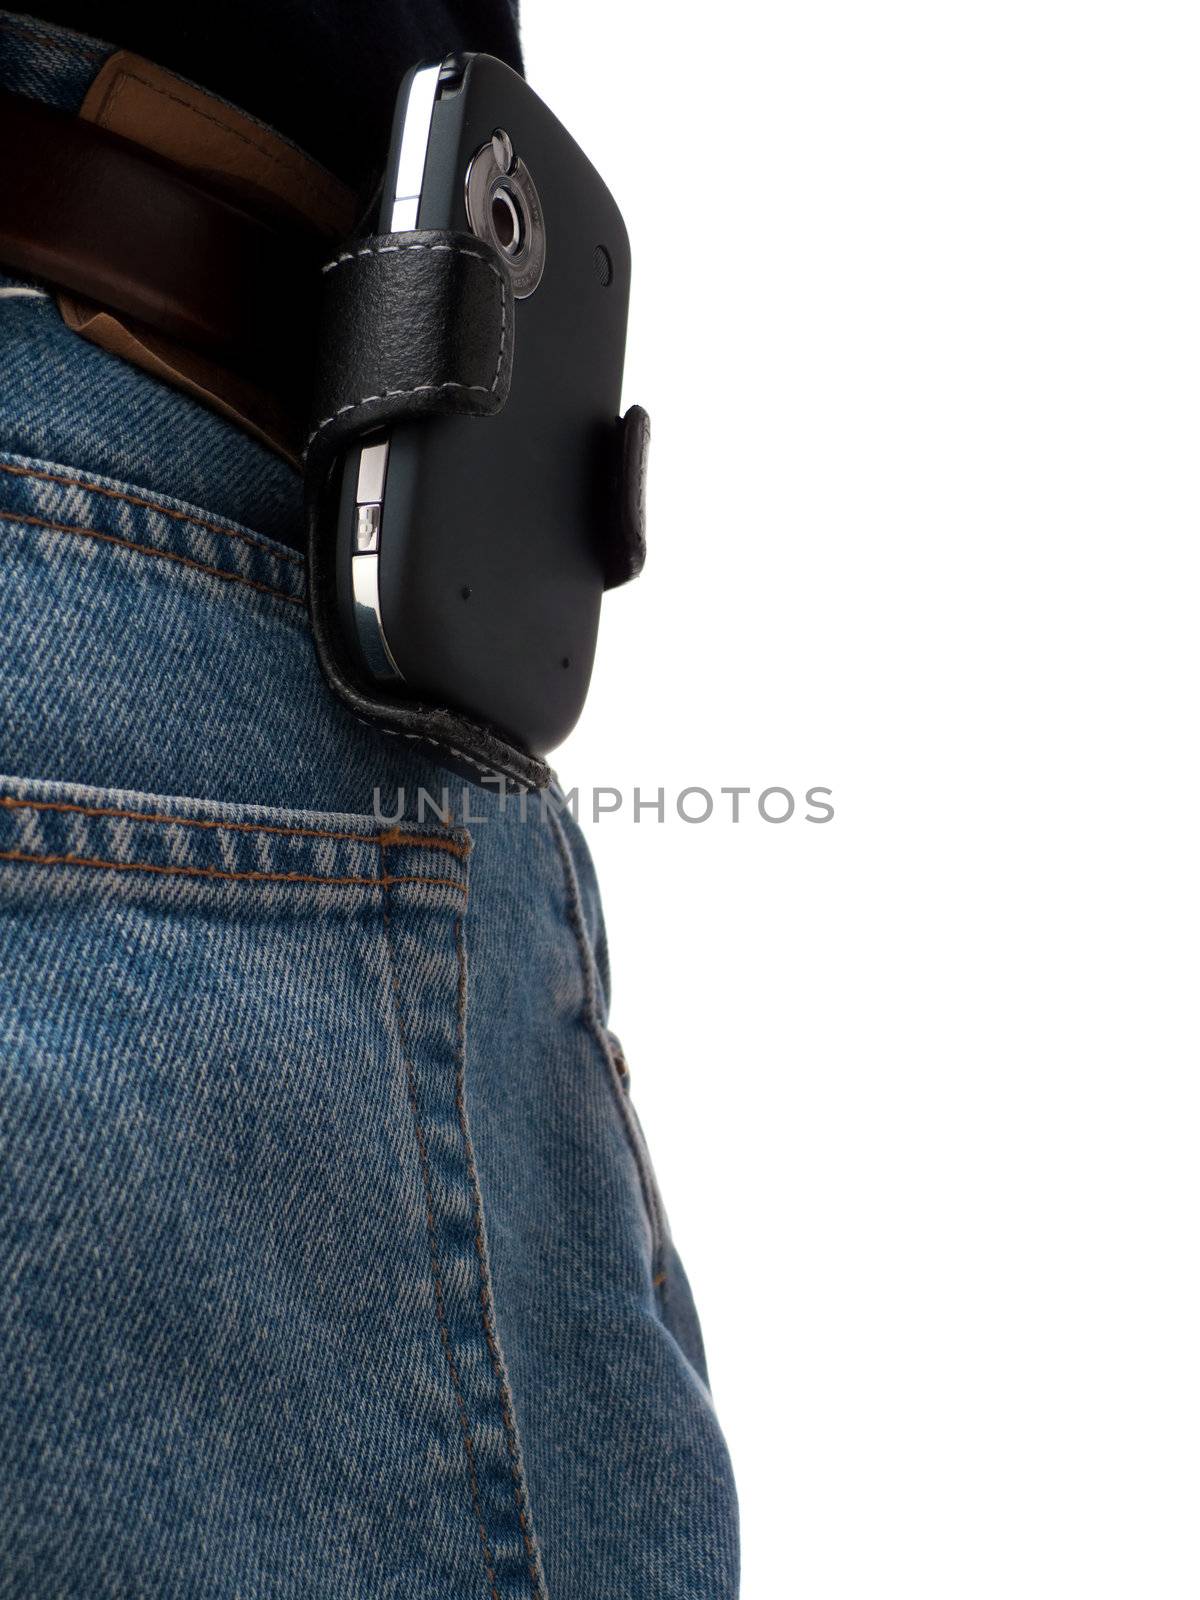 A PDA (Windows Mobile device) in a holster, attached to a belt of an IT worker, wearing jeans, shot from behind, with back pocket visible, isolated on white.